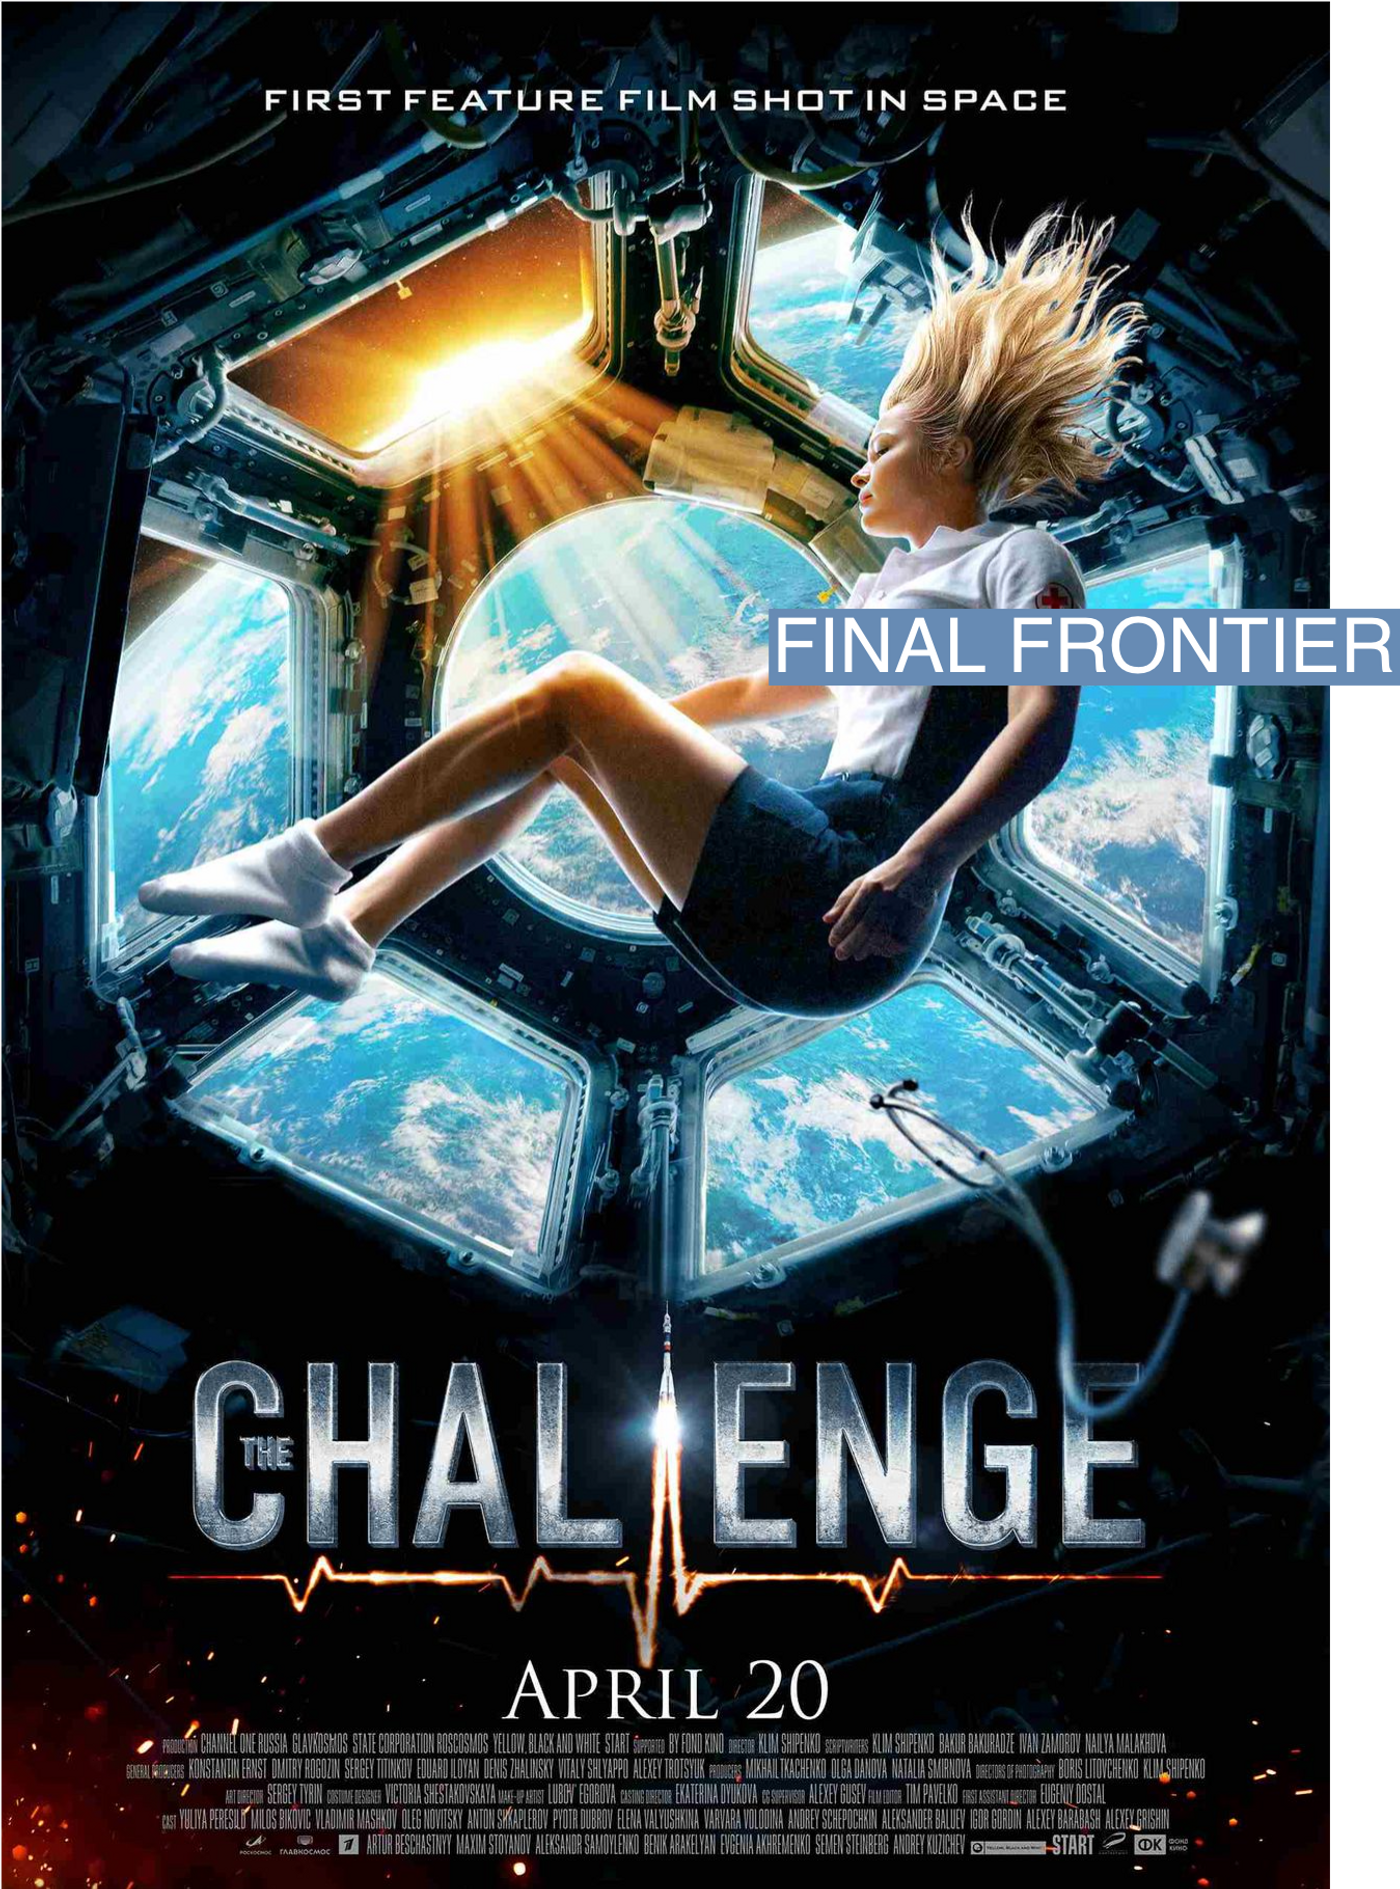 The poster for "The Challenge"